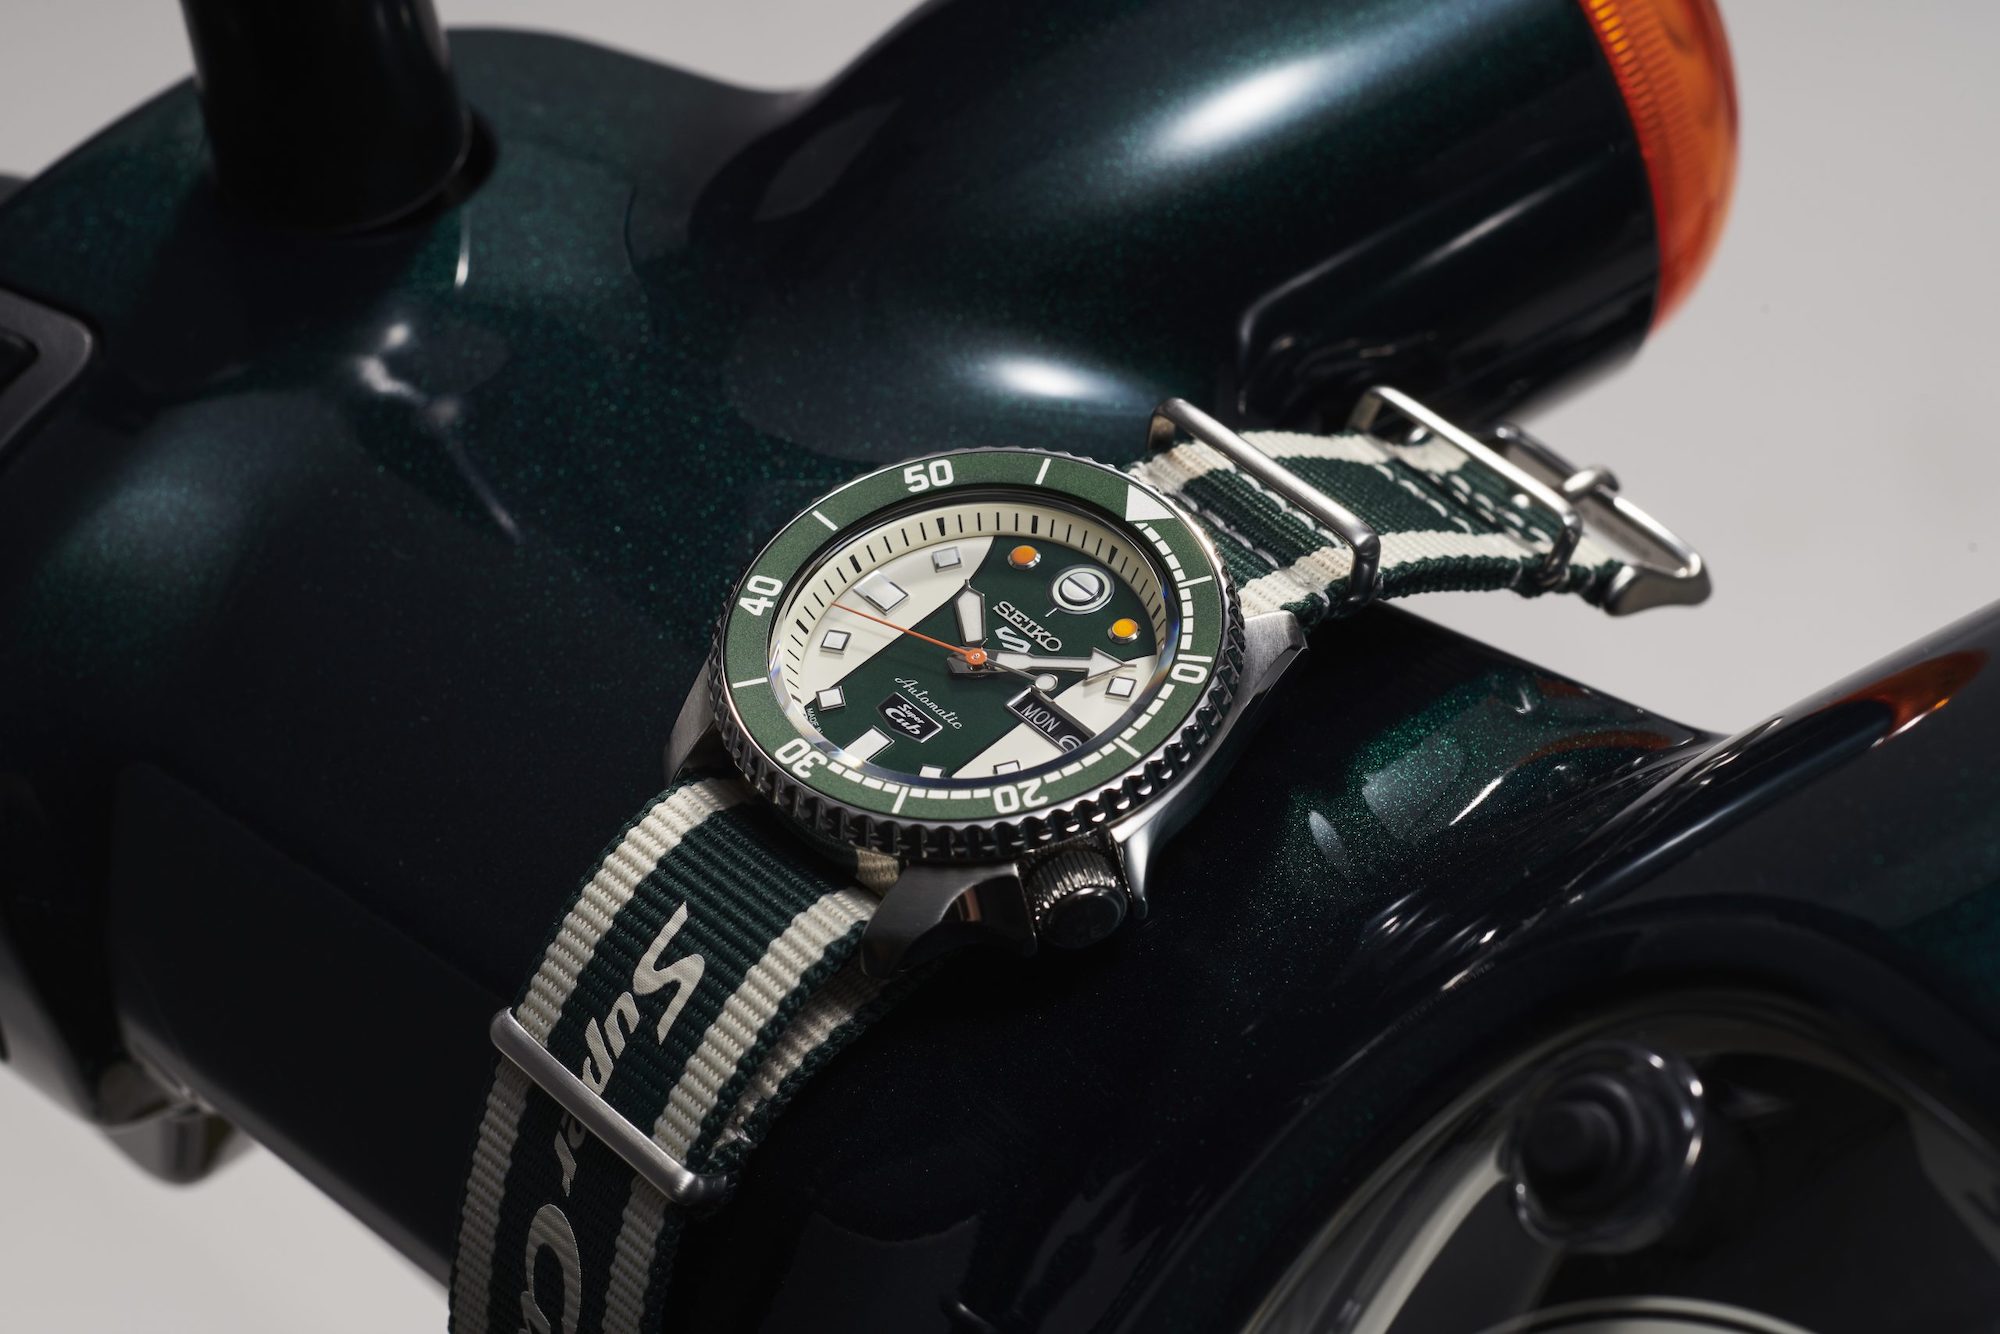 Honda X Seiko A Watch Inspired by the Worlds Most Popular Motorcycle